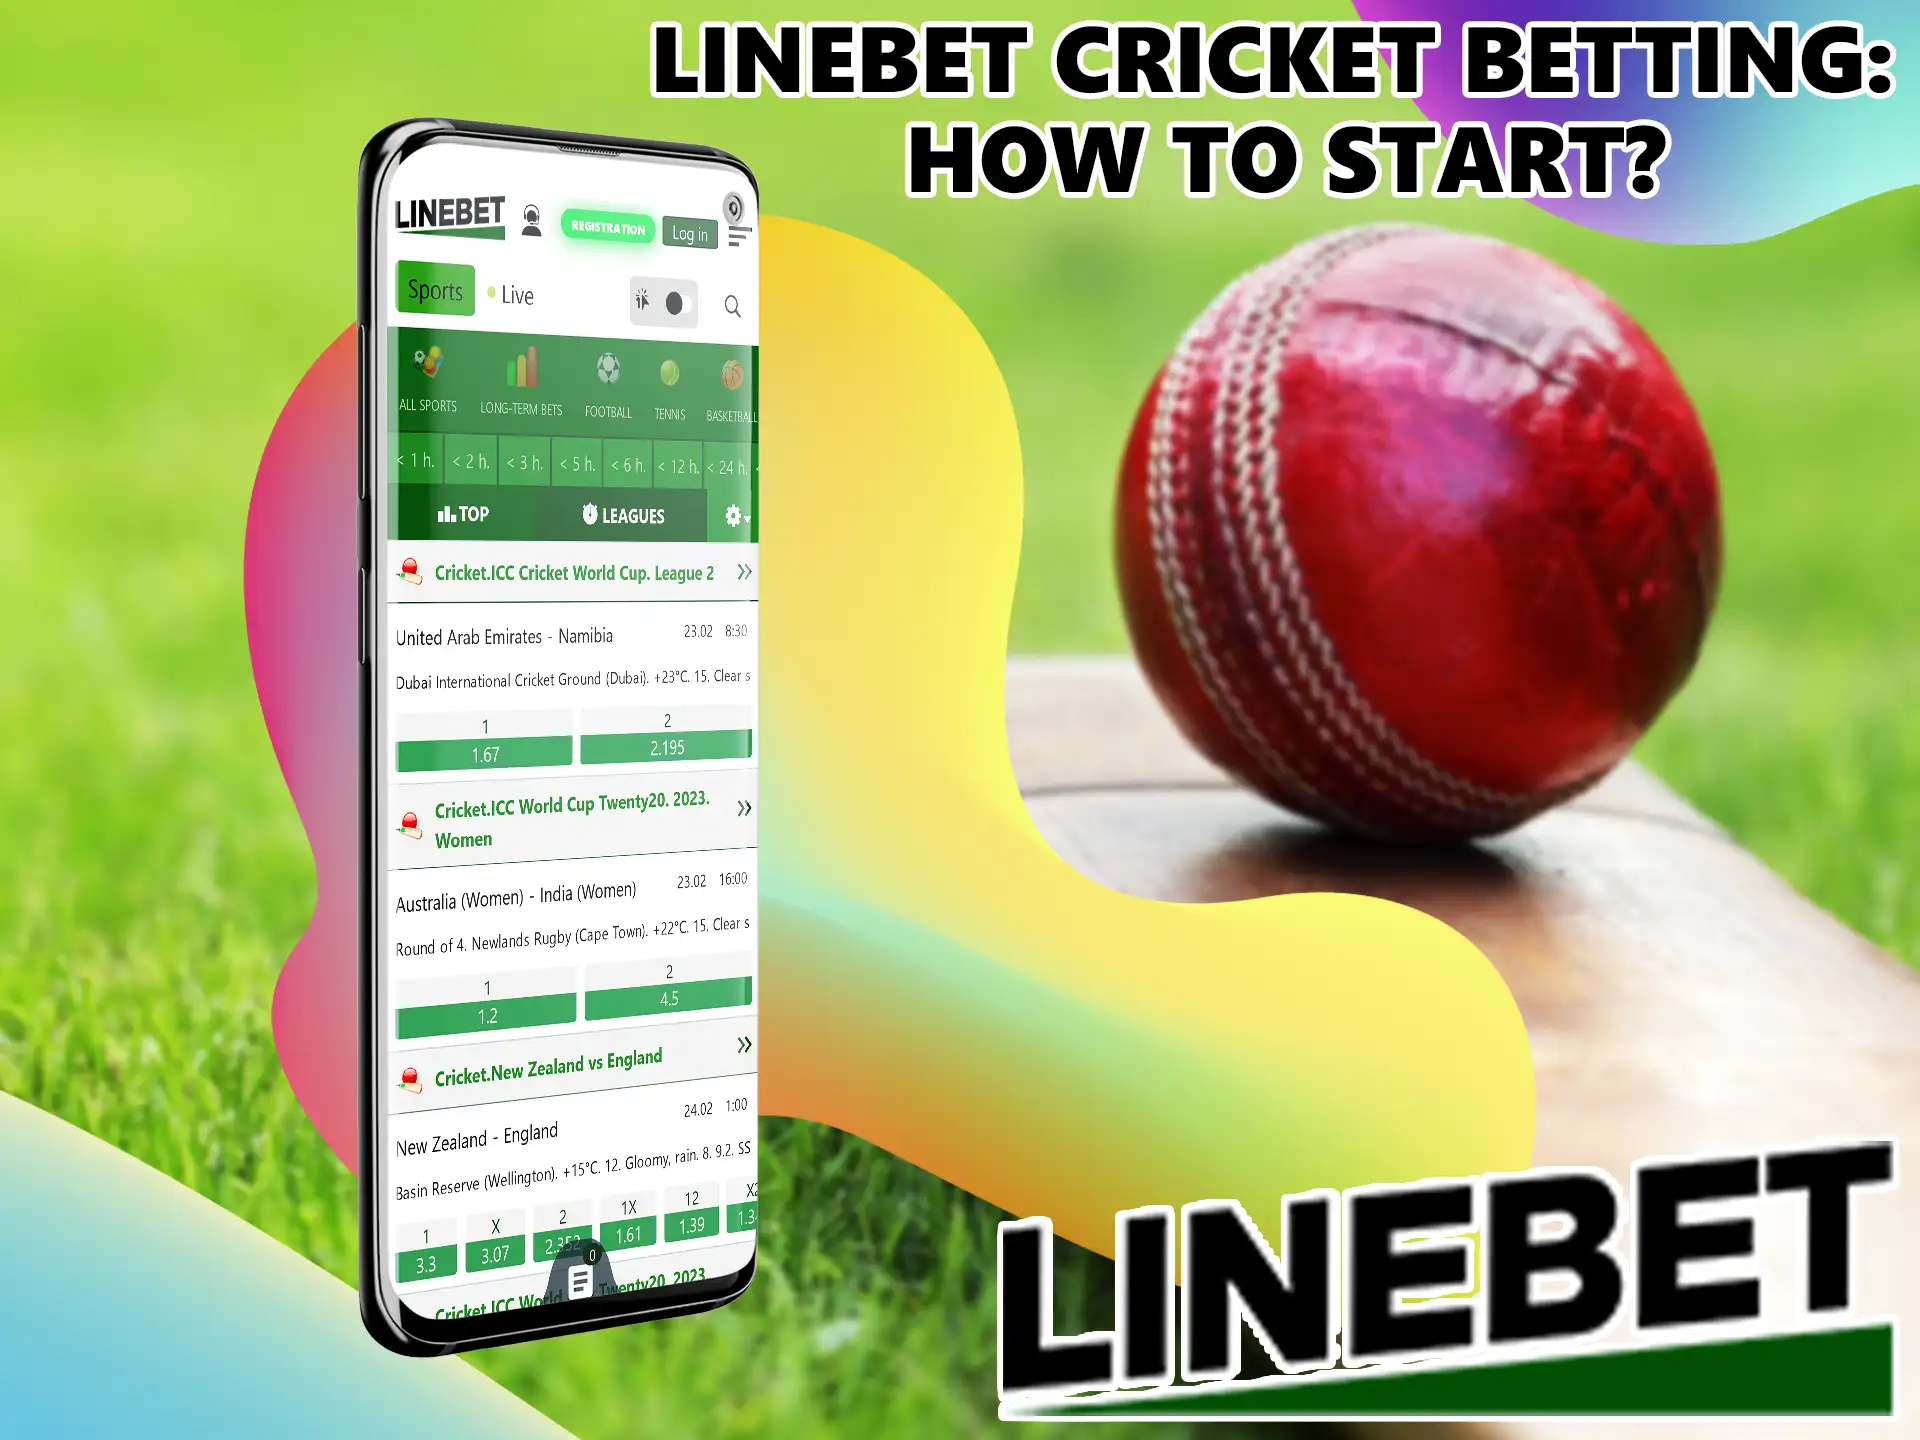 All users need to create a Linebet account in order to start betting, our step-by-step instructions will help you do this.